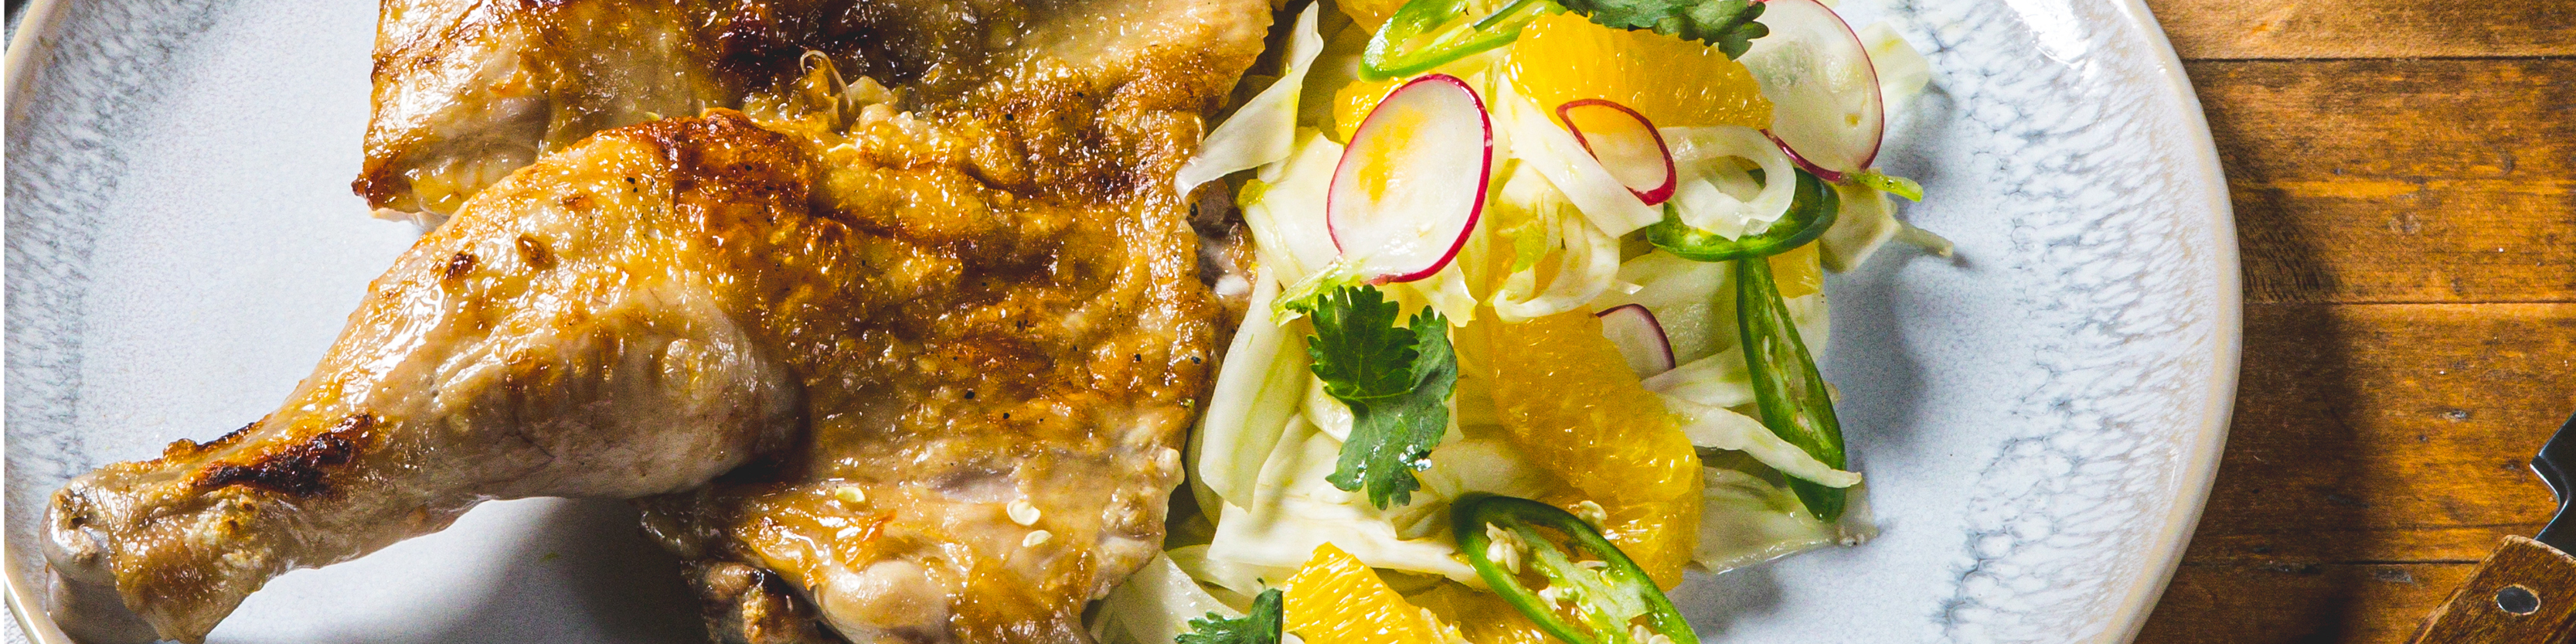 Mojo Chicken with Fennel and Orange Slaw